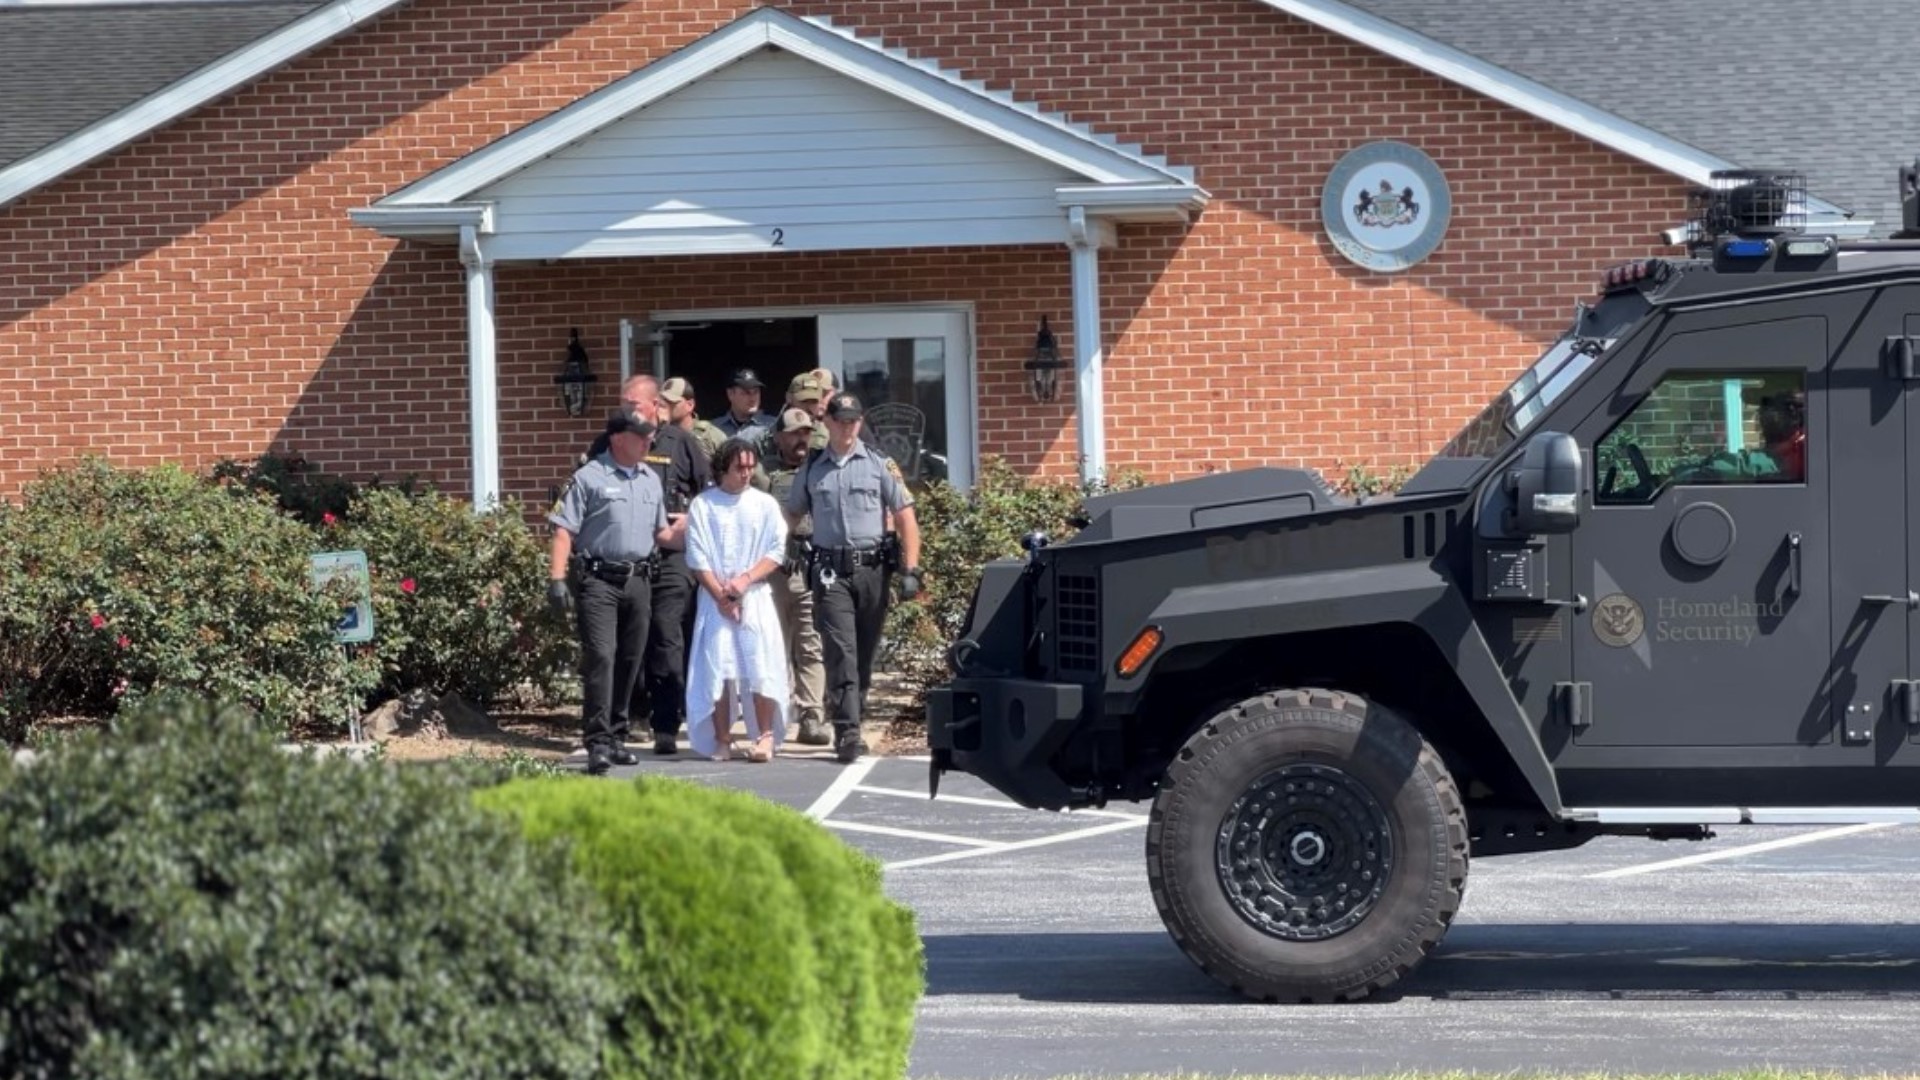 Dozens of people gathered at the State Police Avondale barracks Wednesday to watch Cavalcante be brought in for questioning after he was captured.